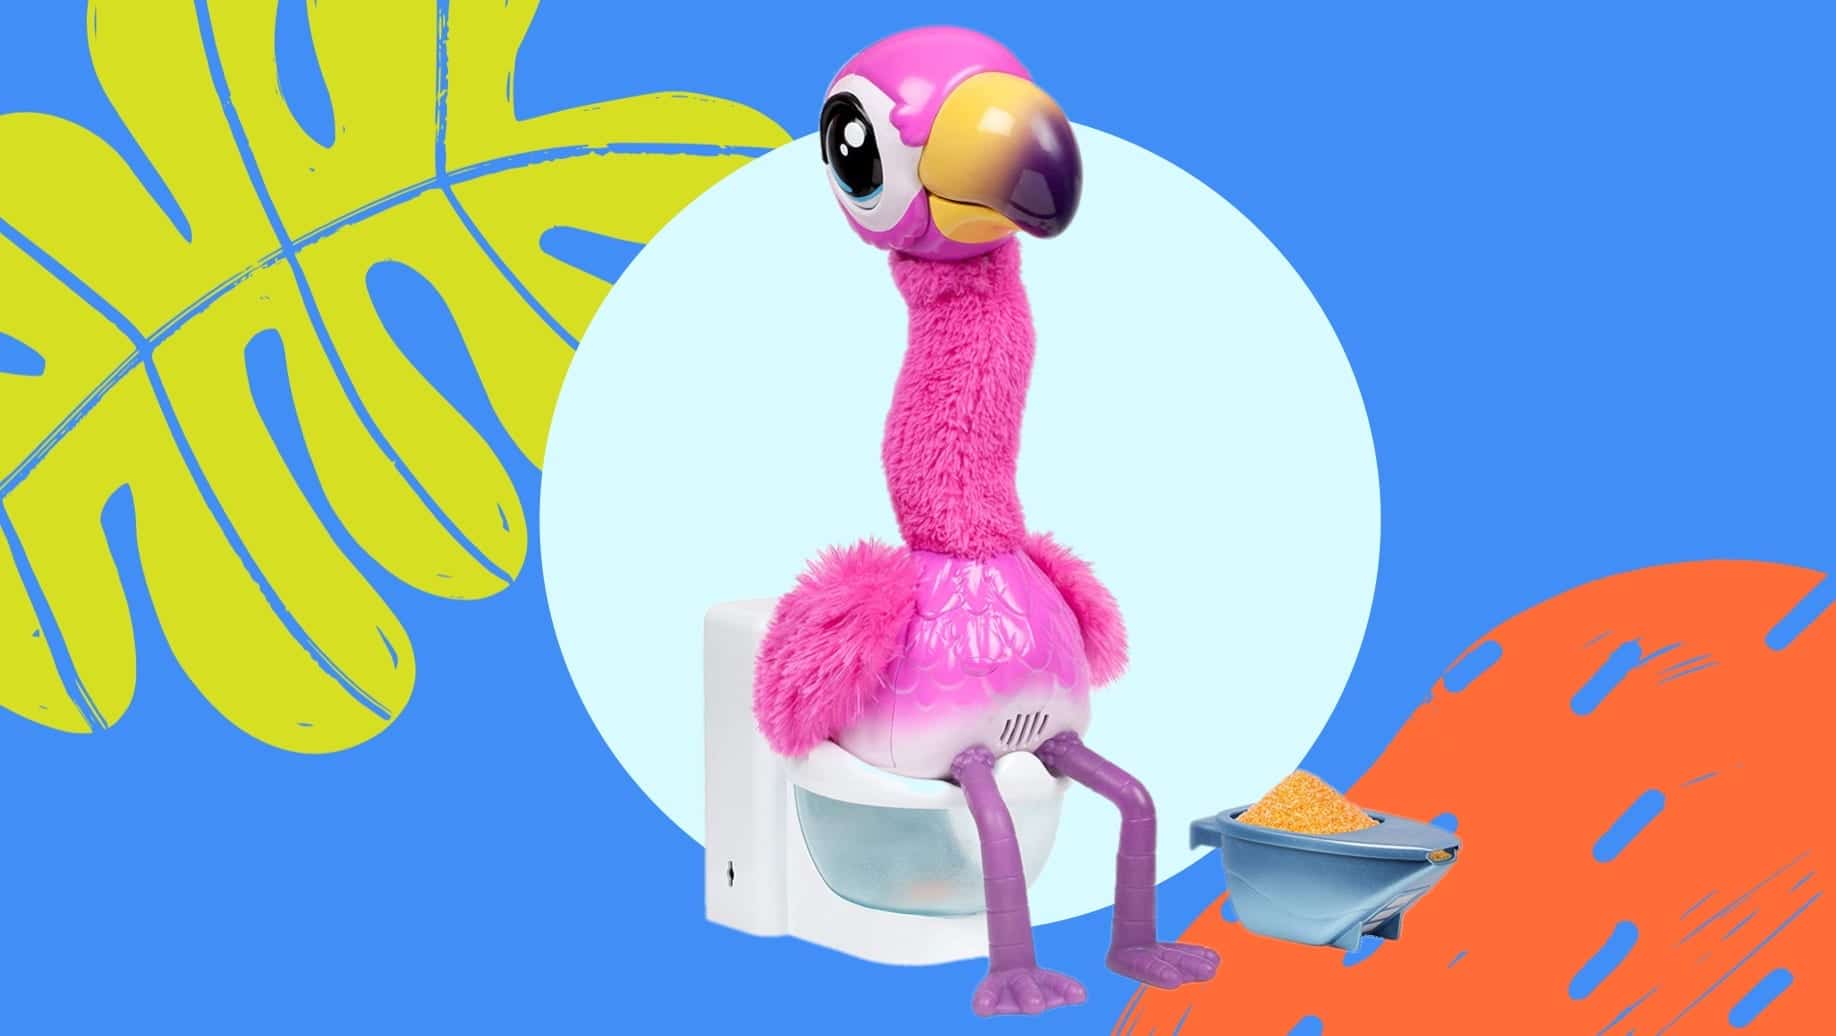 New Little Live Pets Toy Release for 2022 - Gotta Go Flamingo